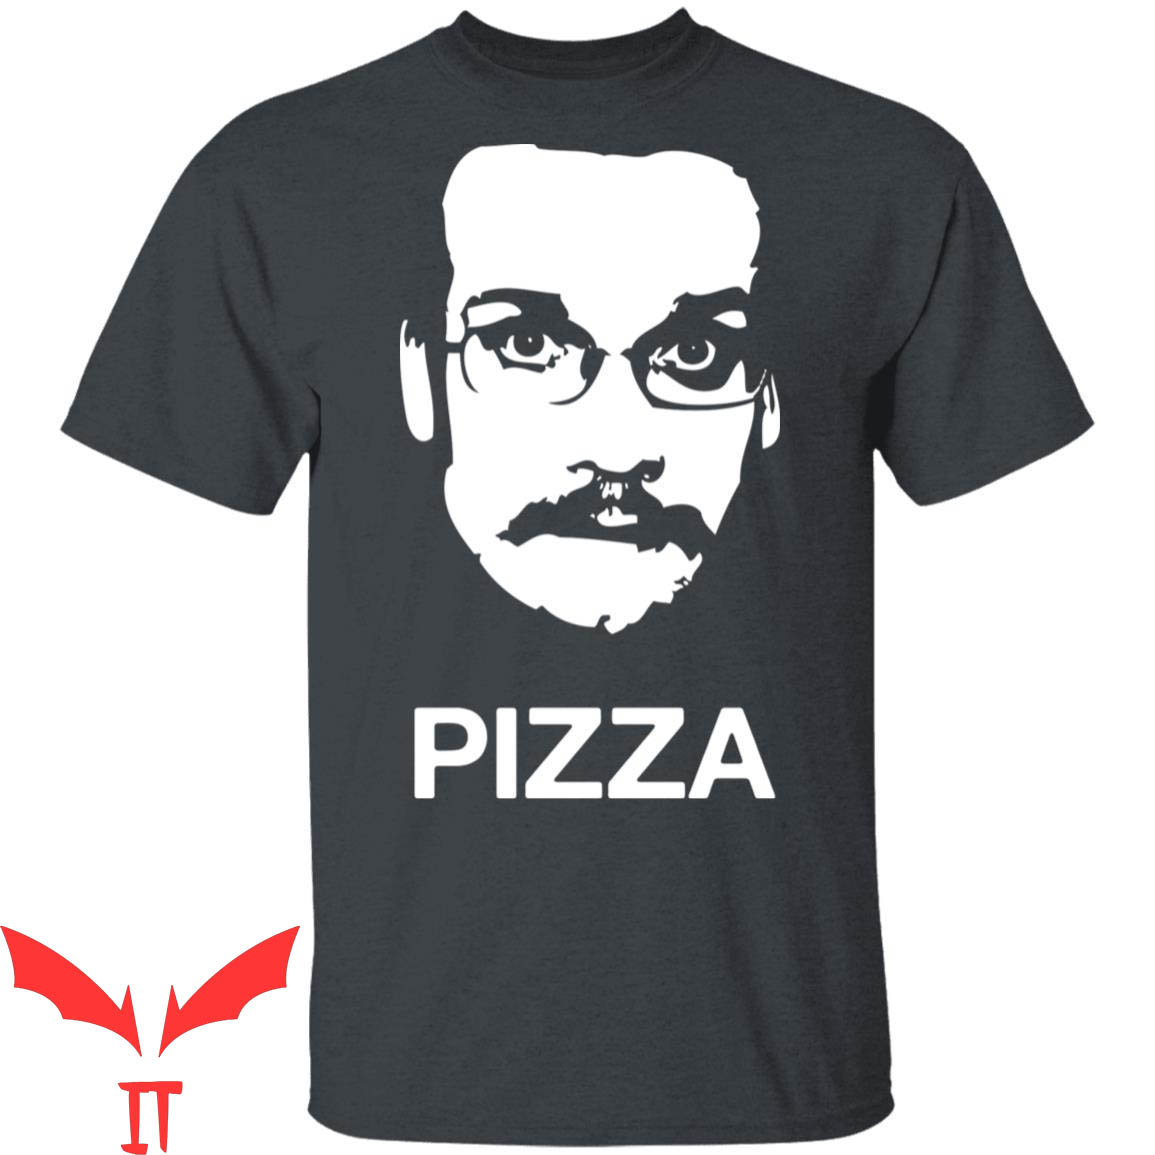 Pizza John T-Shirt Really Face Funny Graphic Cool Tee